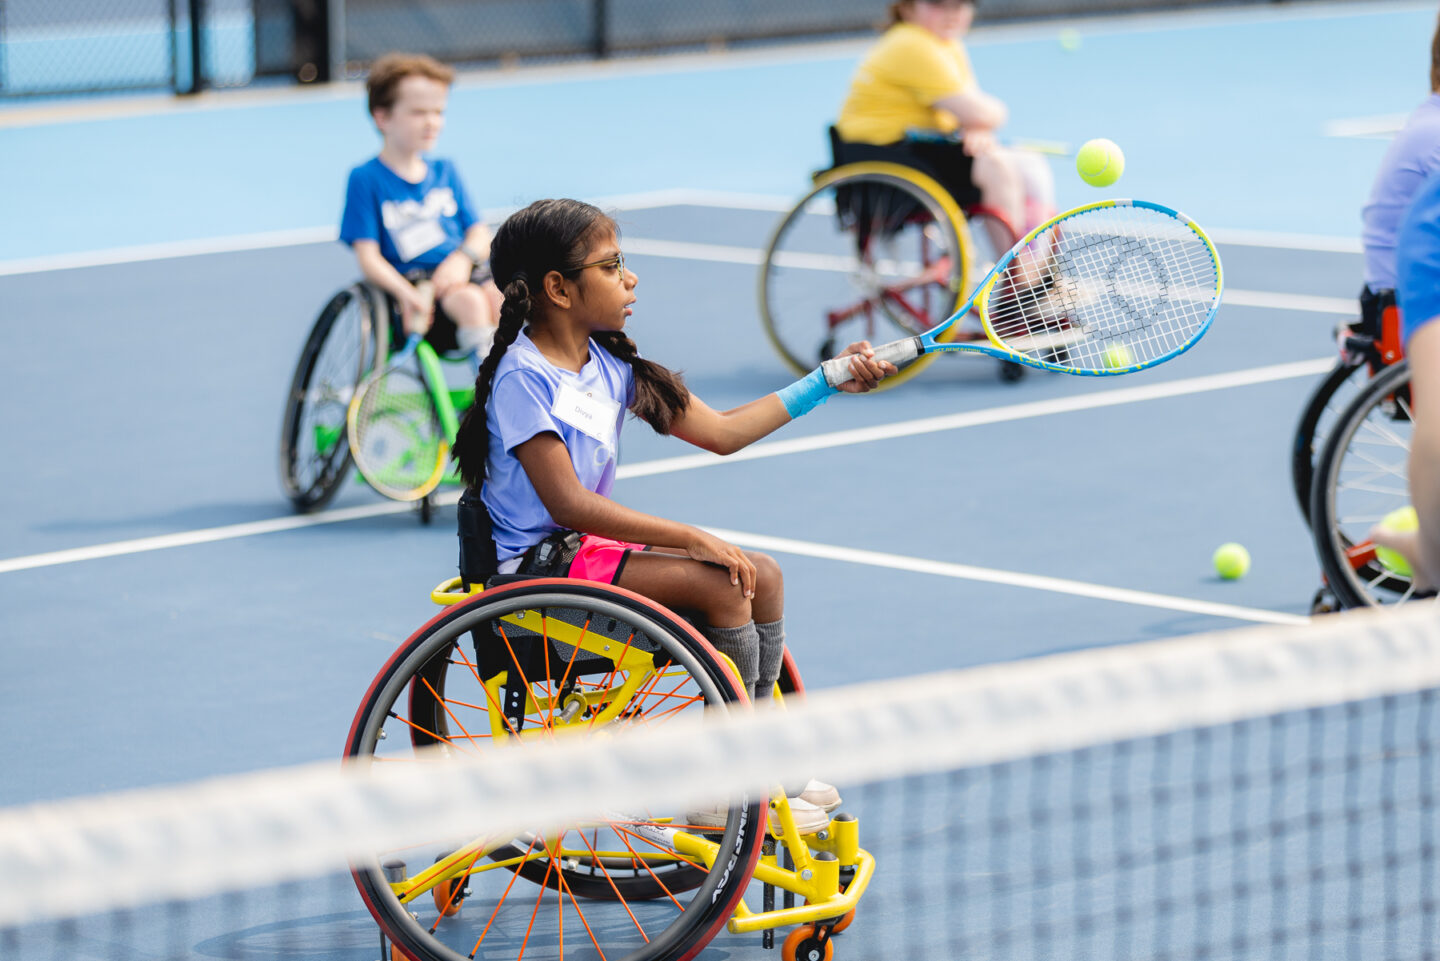 A young girl in a wheelchair practicing her tennis skills on a blue court.